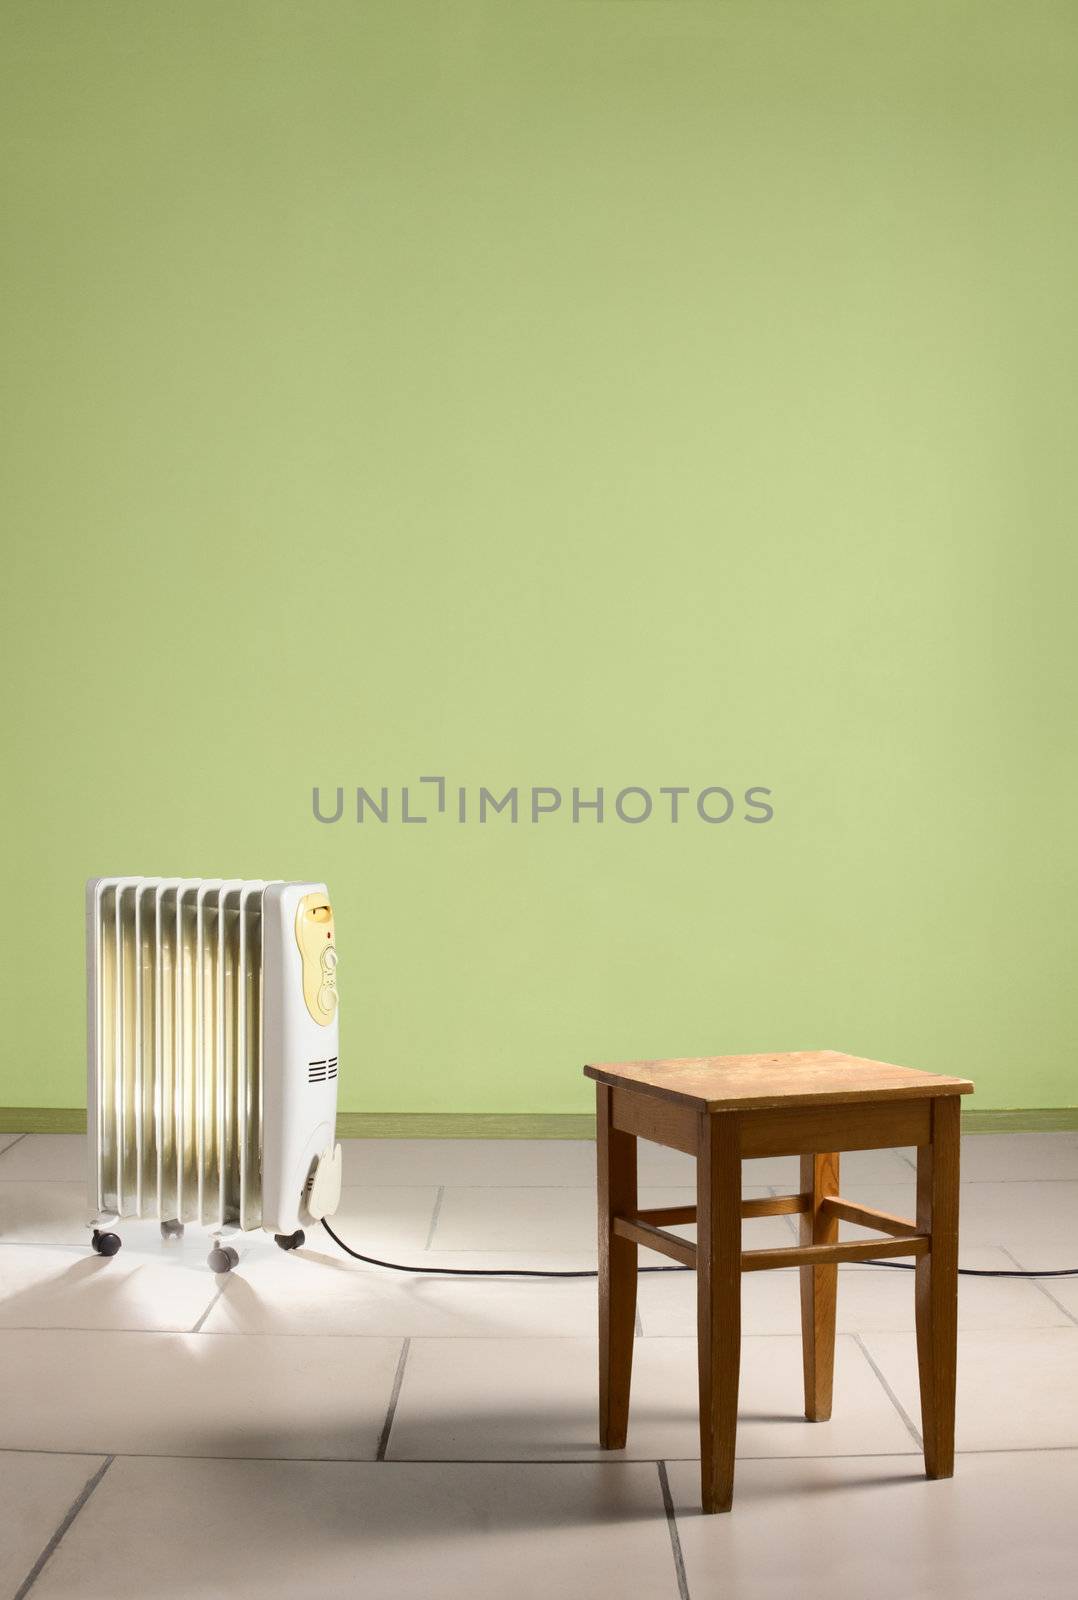 Empty room with heating electricity radiator and wooden chair. Green walls and stone tiles on the floor.